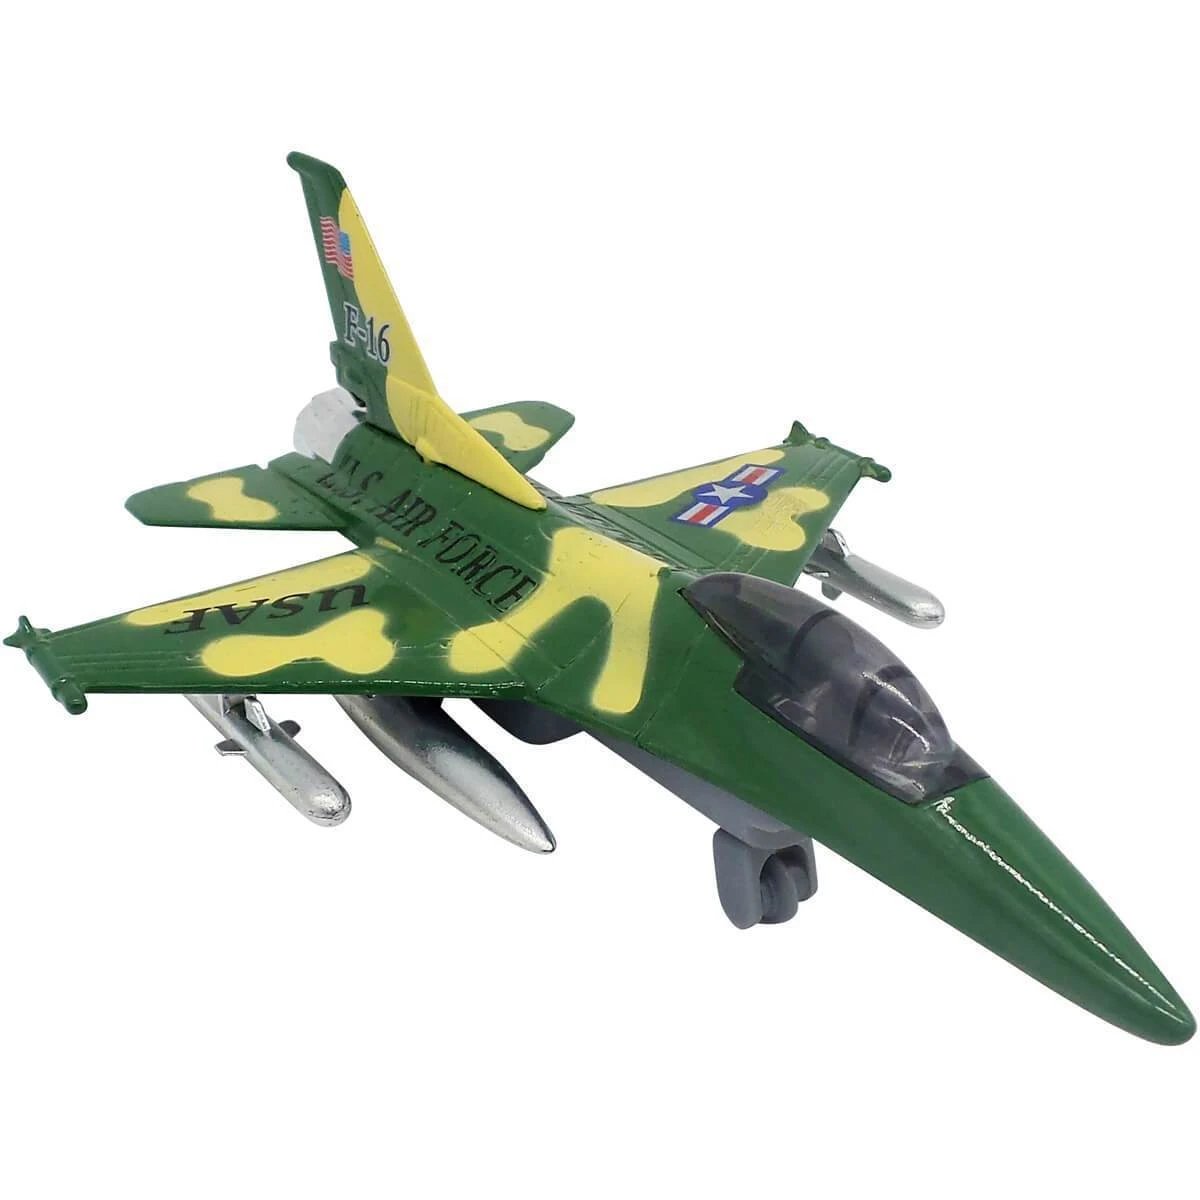 U.S. Airforce F-16 Fighter Jet Pullback Toy, Complete with pullback action and an opening cockpit- Assortment